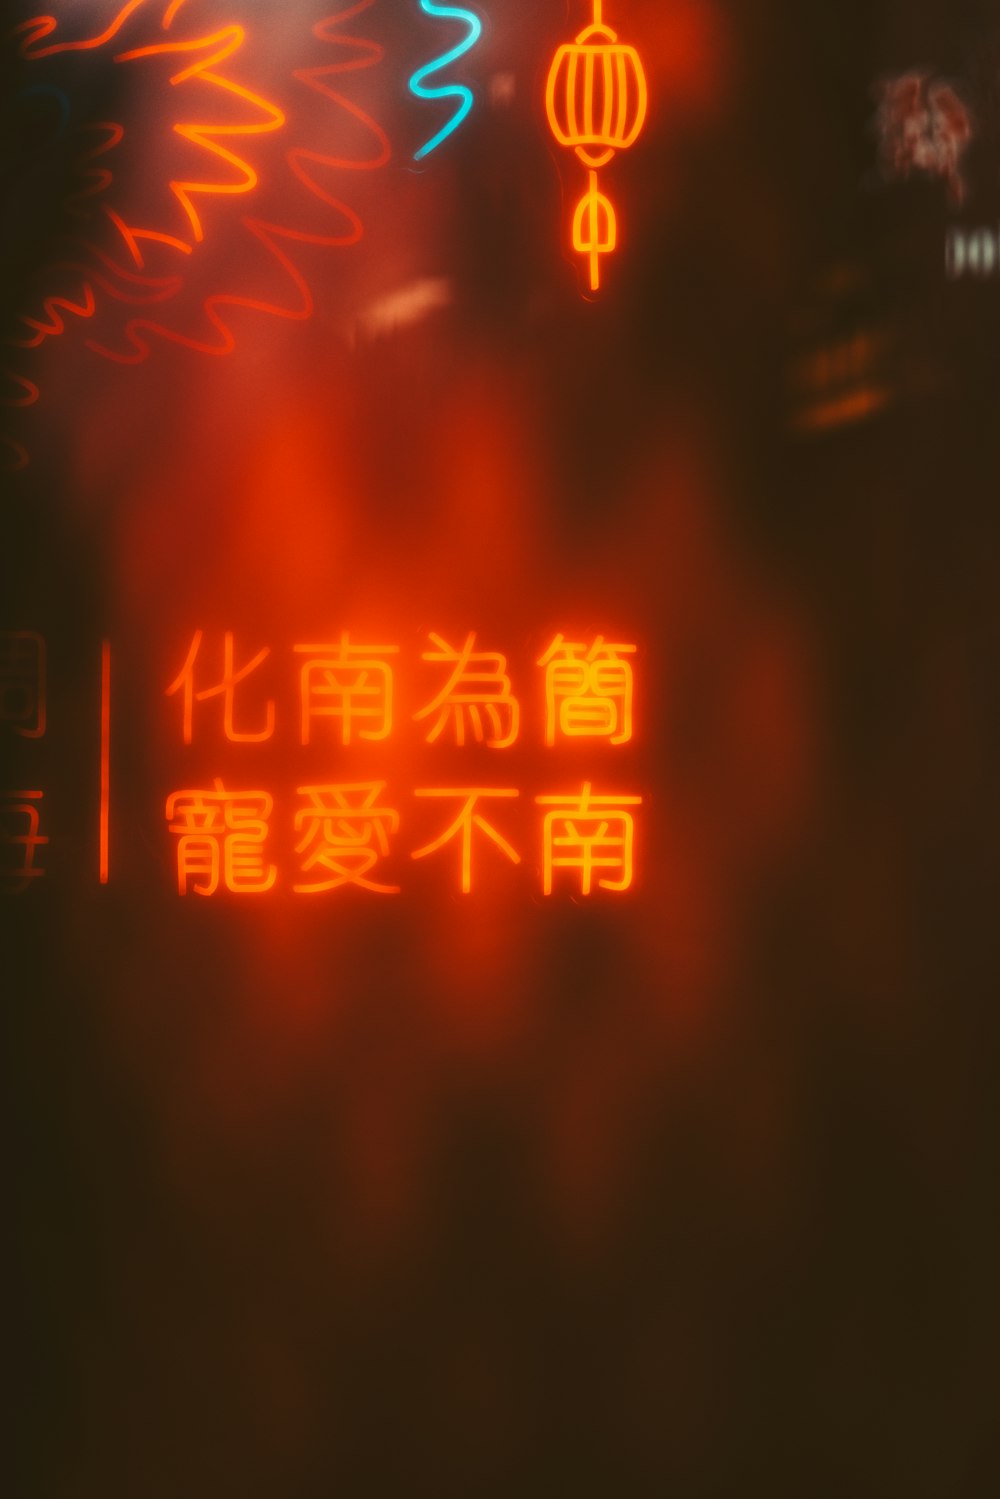 a blurry photo of a neon sign in an asian language